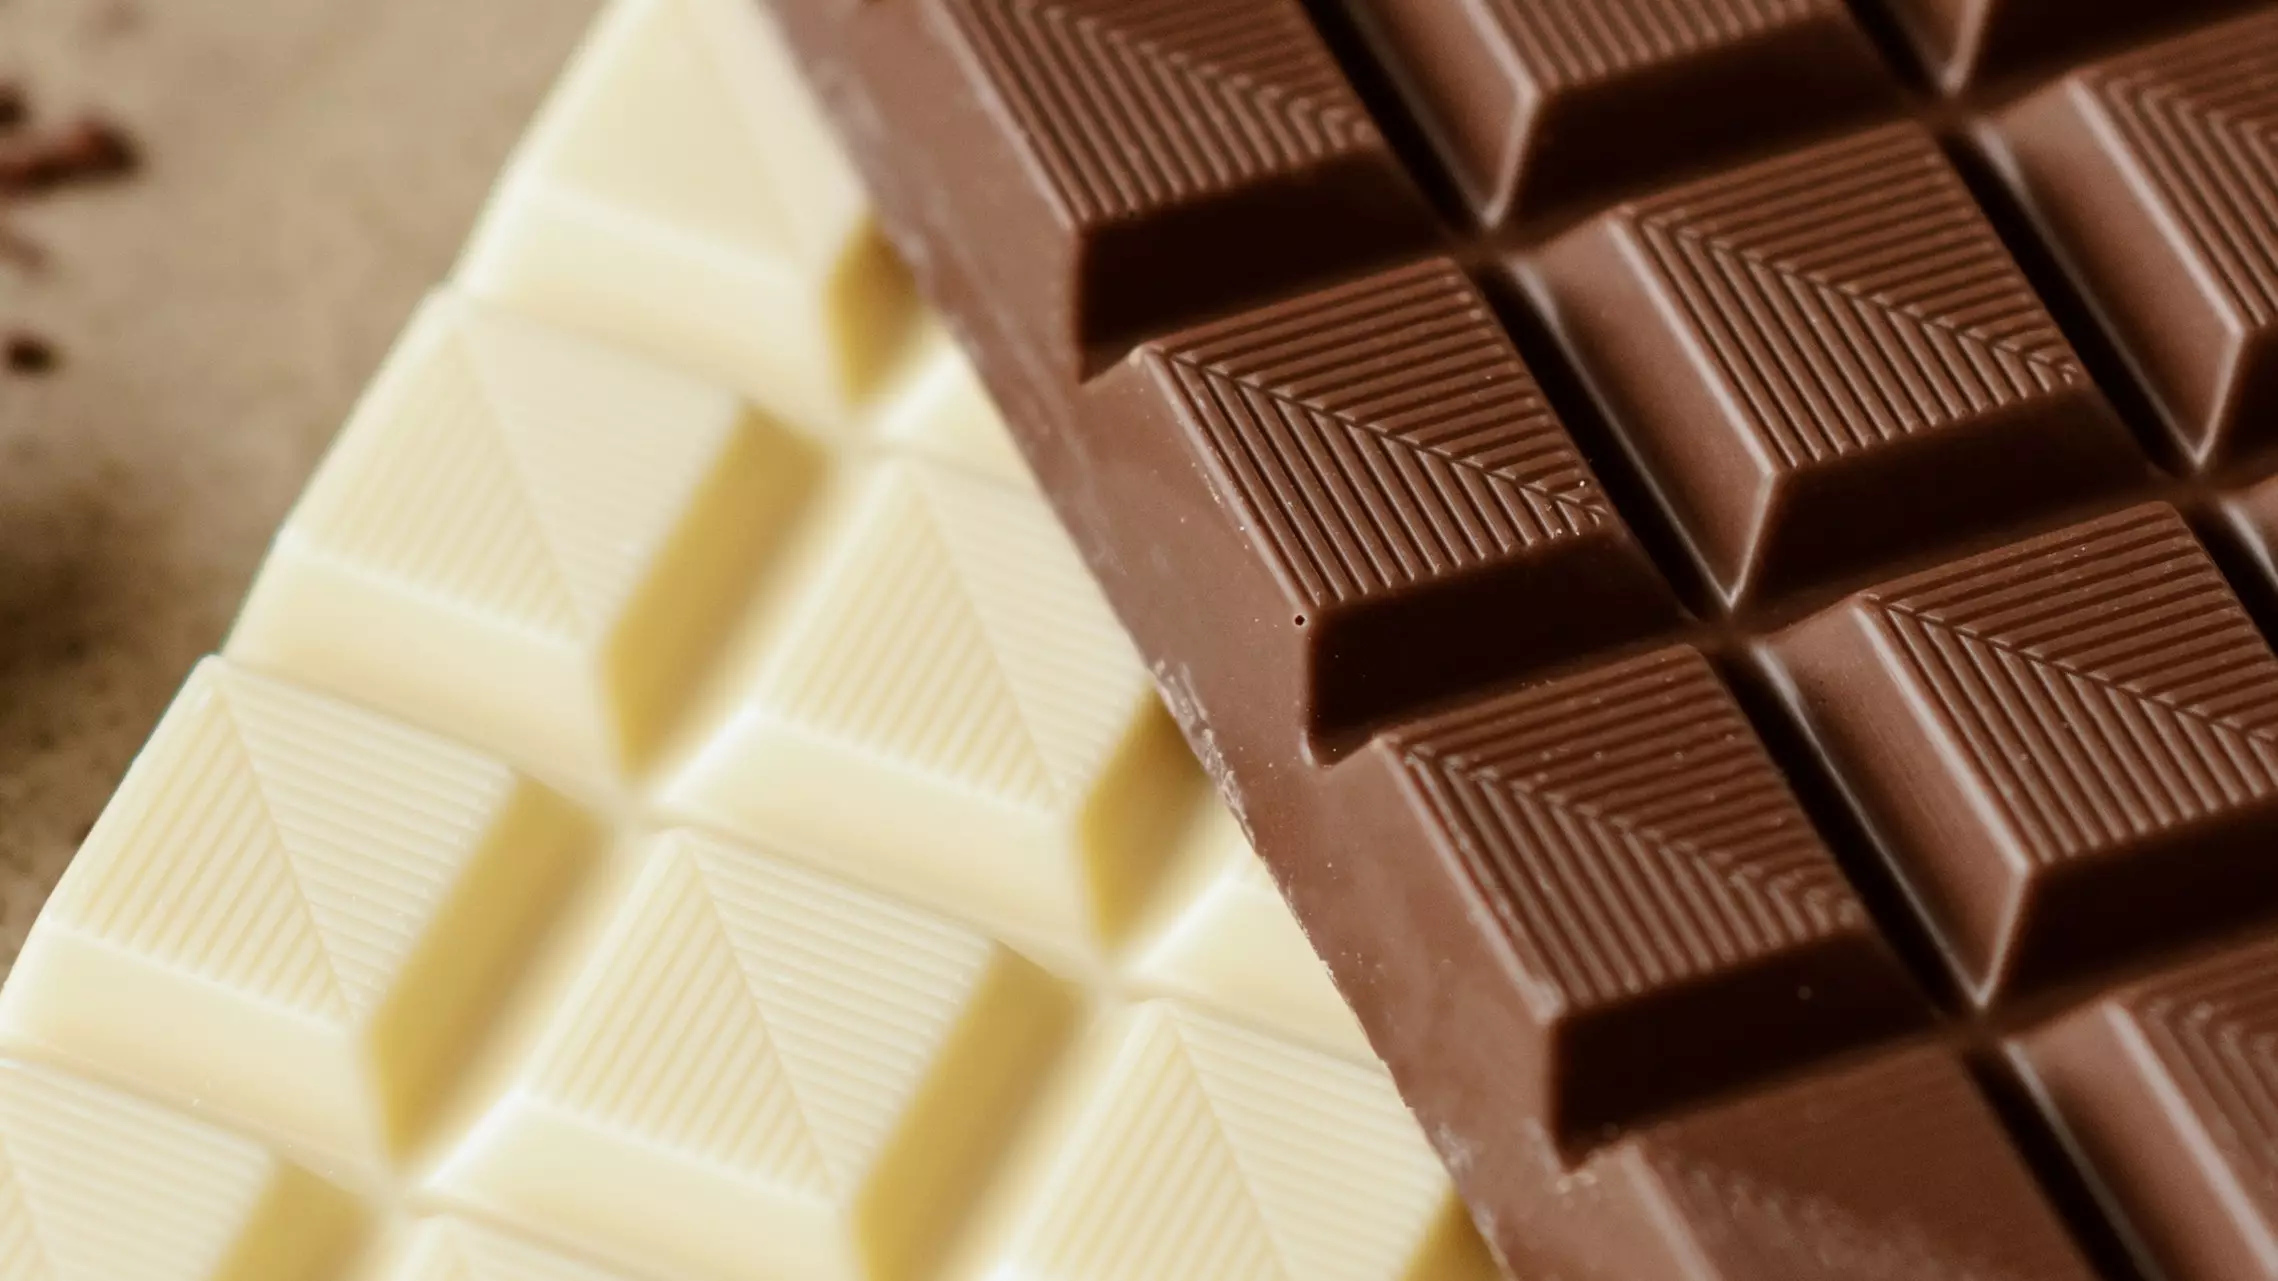 You Can Now Get Paid To Taste Chocolate 